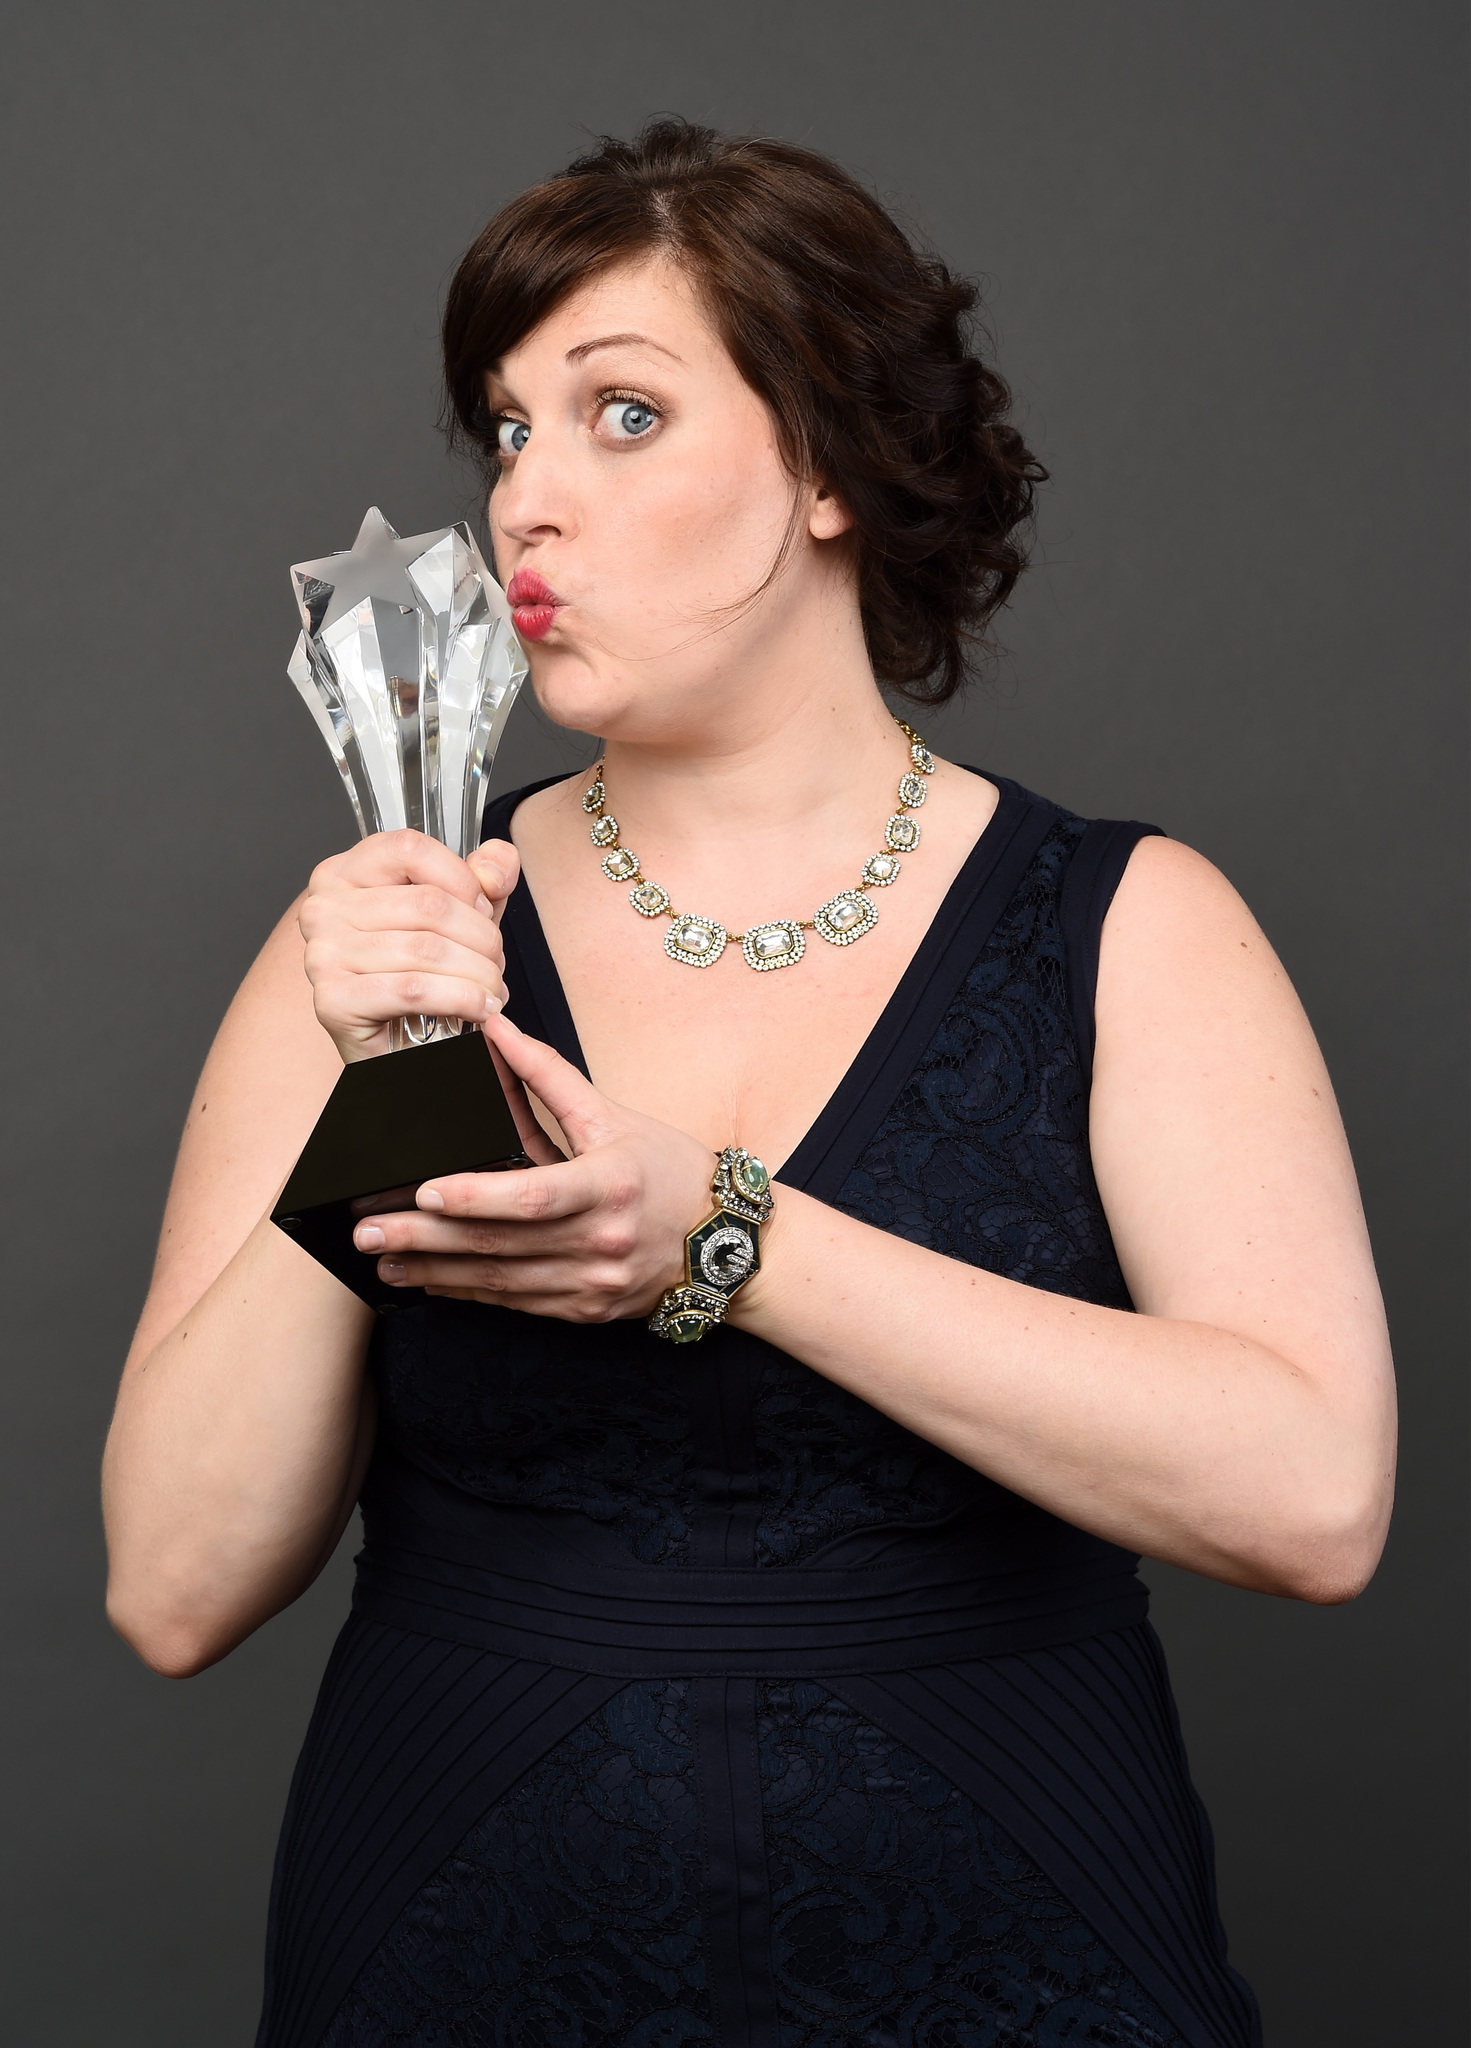 Actress Allison Tolman, winner of the Best Supporting Actress in a Movie or Mini-Series award for 'Fargo,' poses for a portrait during the 4th Annual Critics' Choice Television Awards at The Beverly Hilton Hotel on June 19, 2014 in Beverly Hills, California.